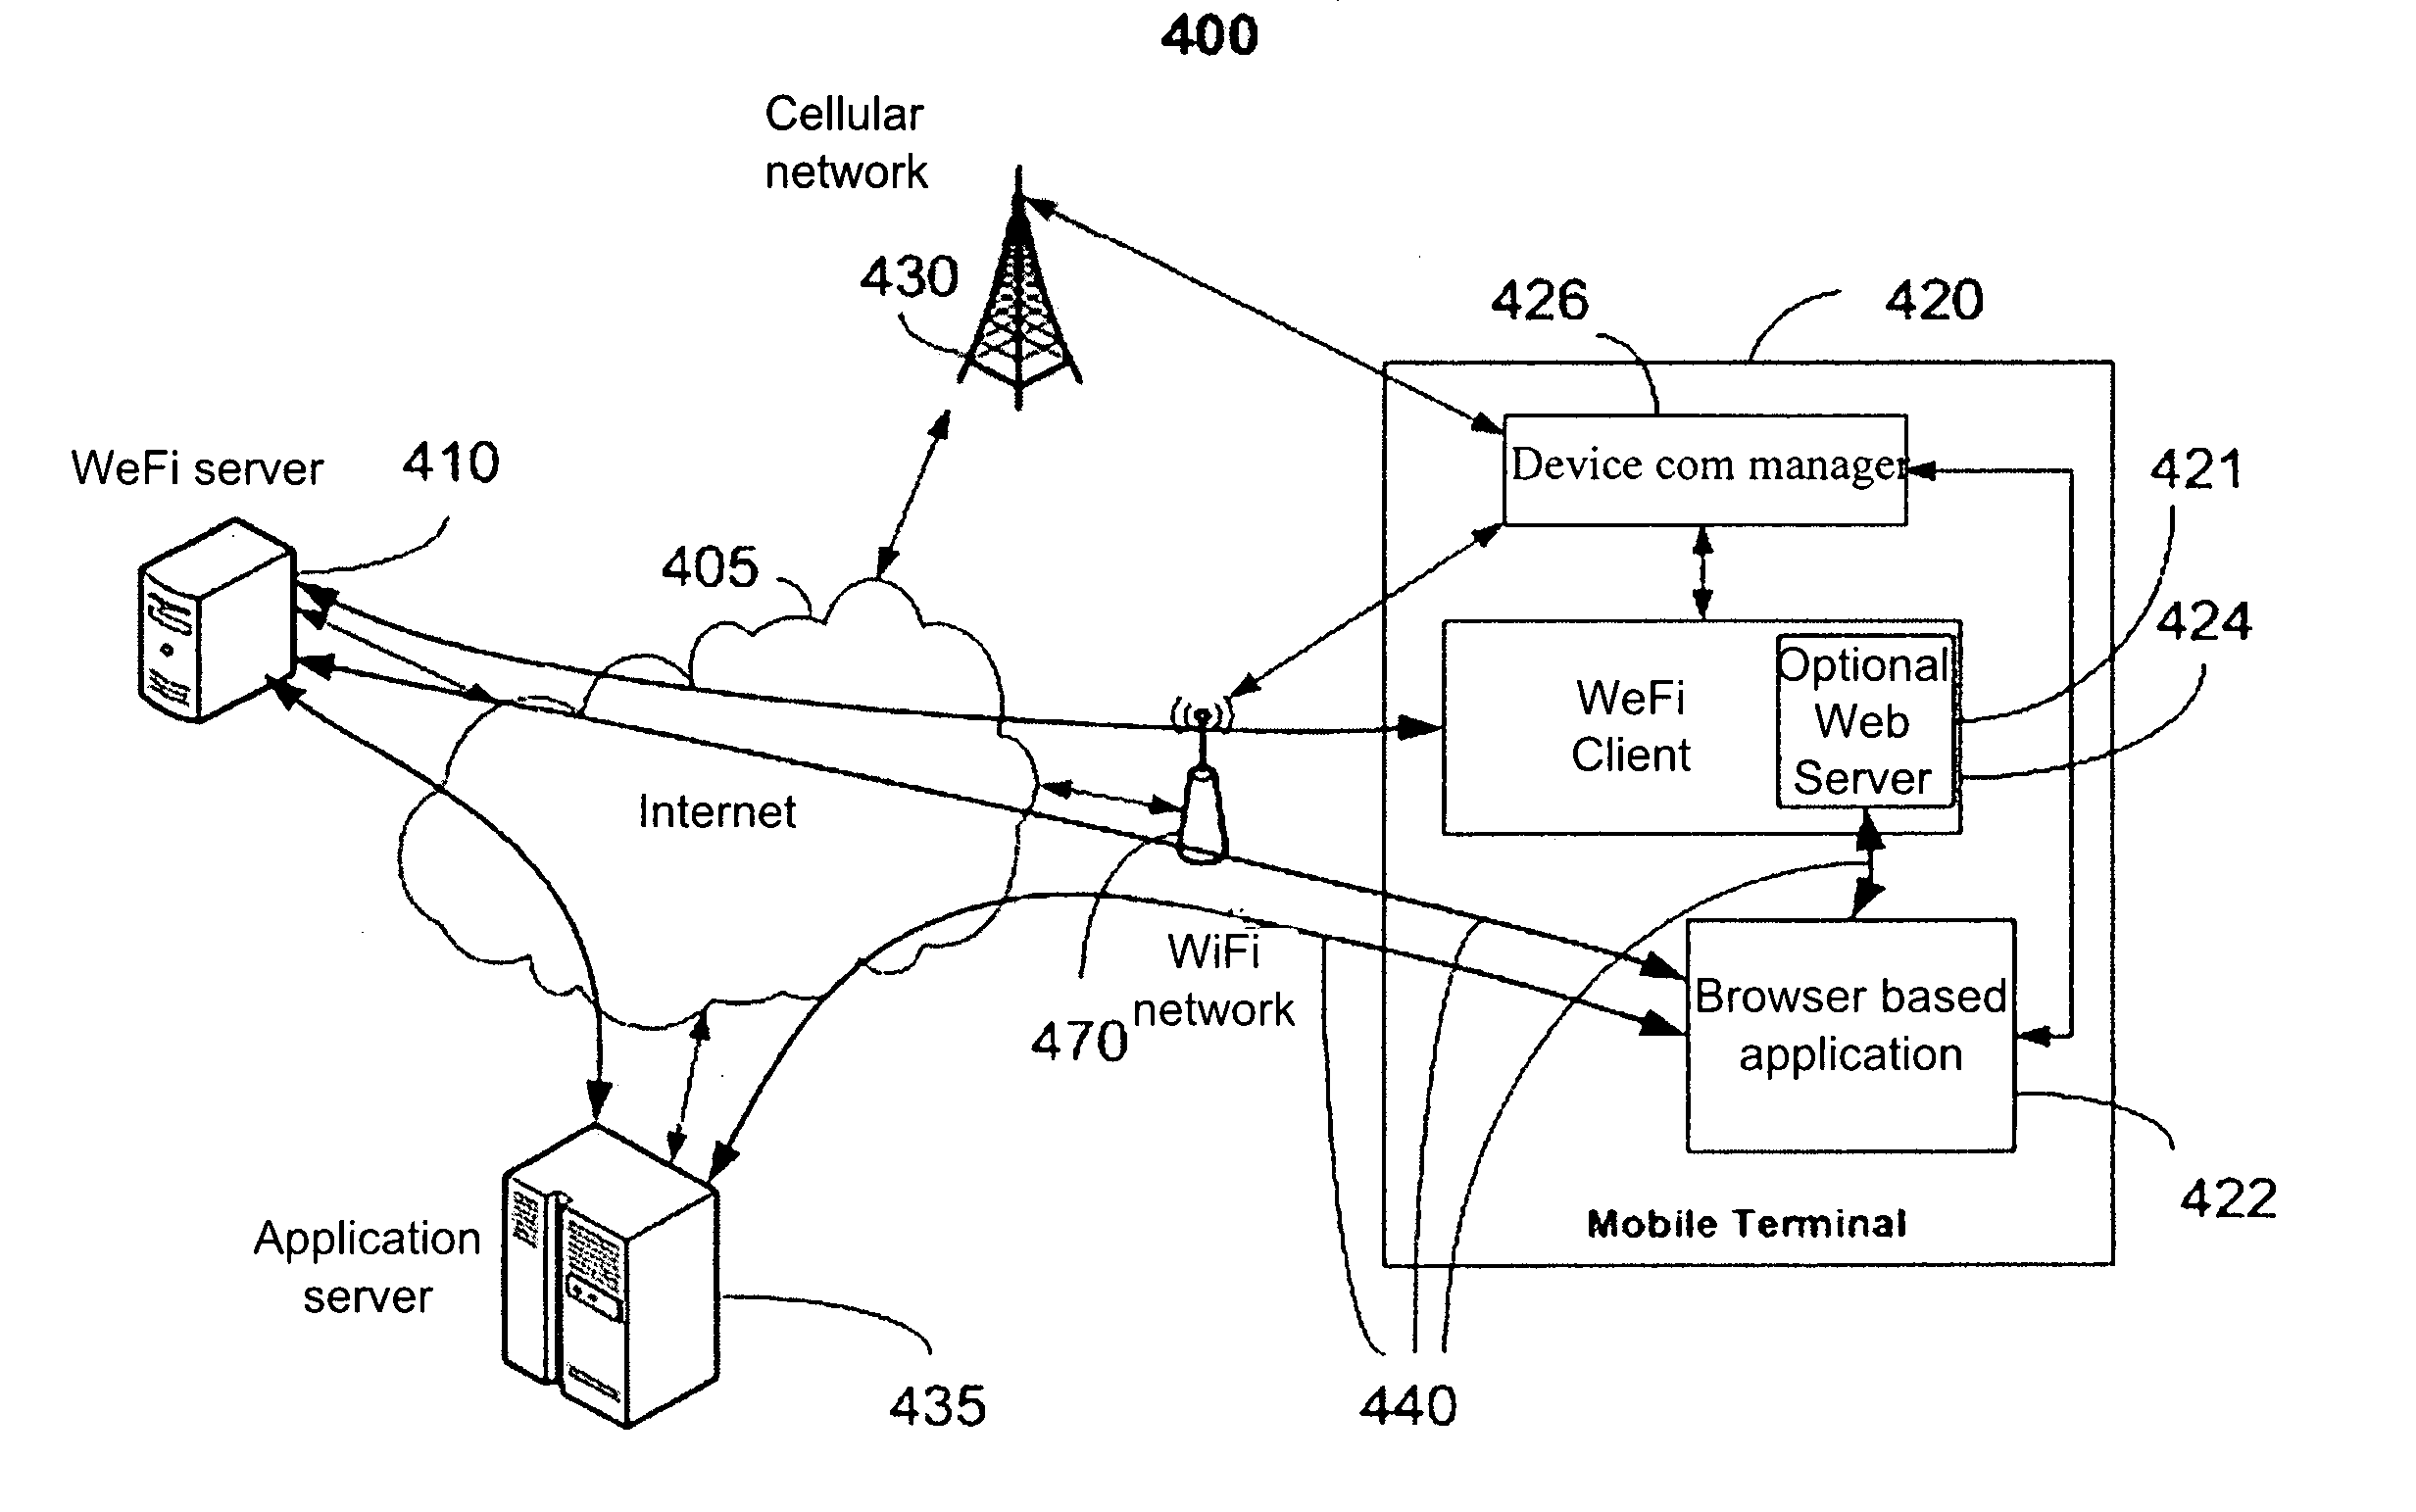 System and method for providing seamless broadband internet access to web applications